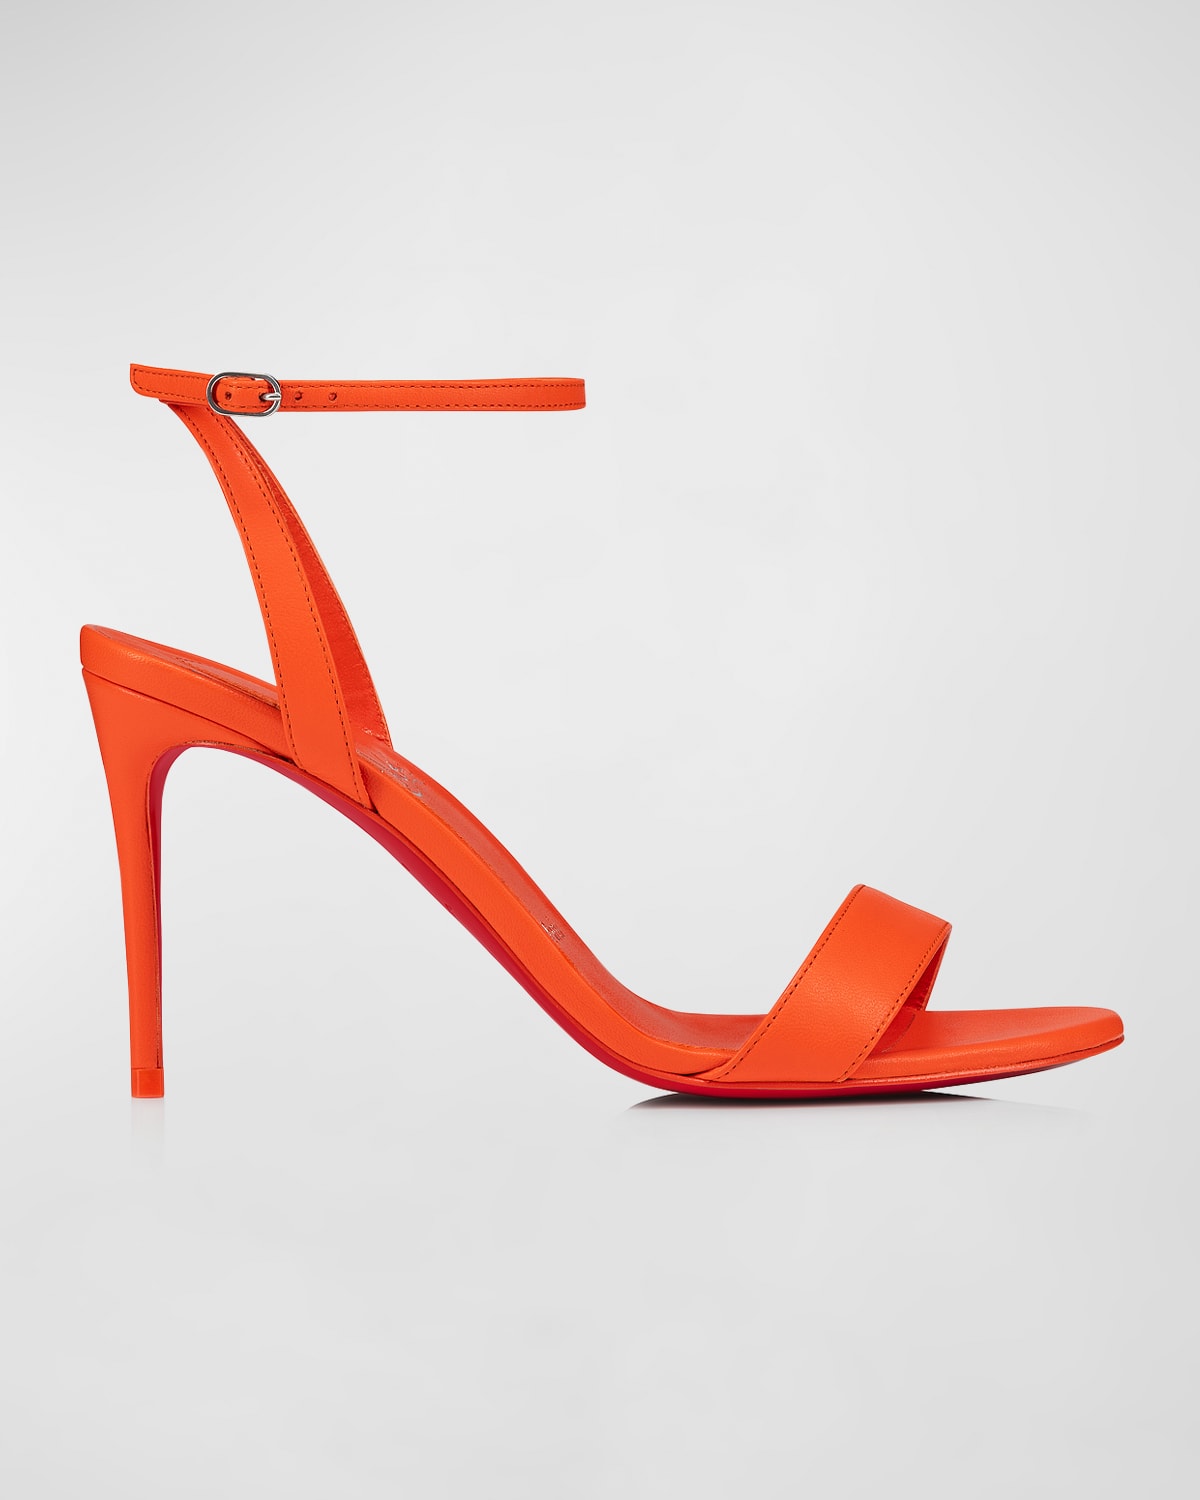 CHRISTIAN LOUBOUTIN LOUBIGIRL ANKLE-STRAP RED SOLE SANDALS